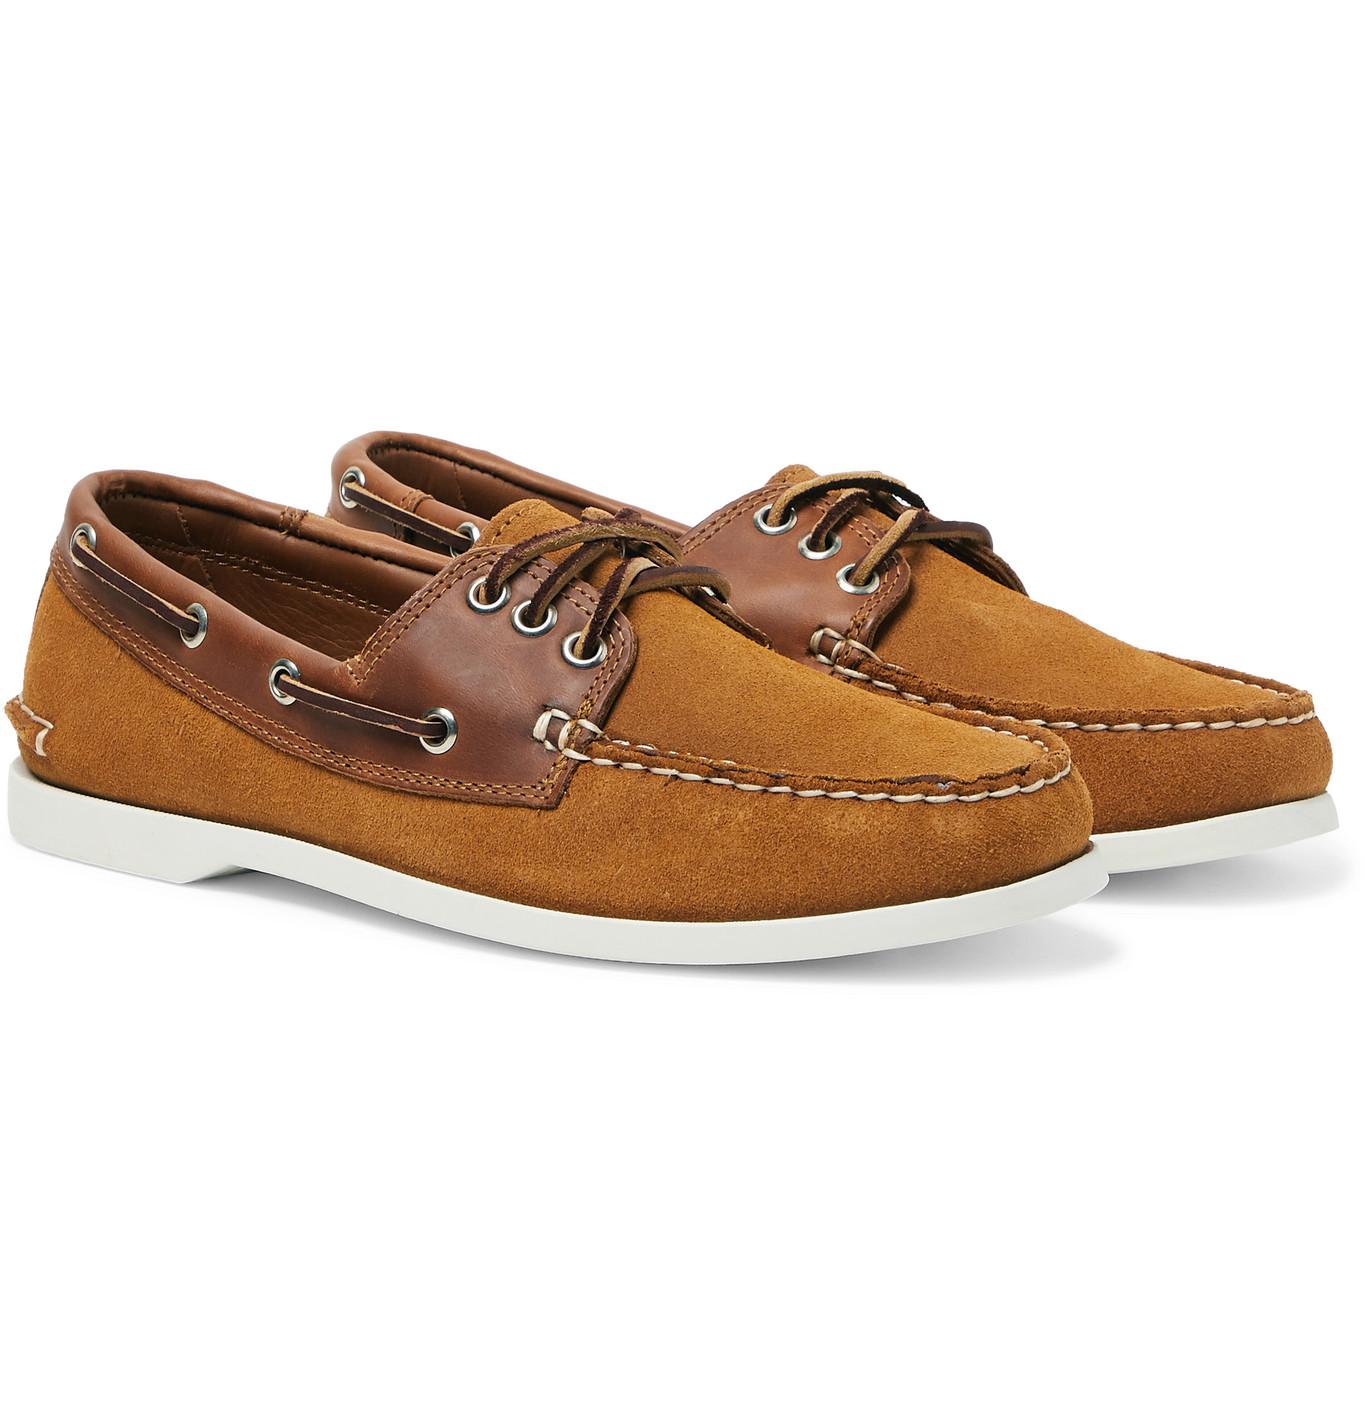 Quoddy Downeast Suede And Leather Boat Shoes in Brown for Men - Lyst